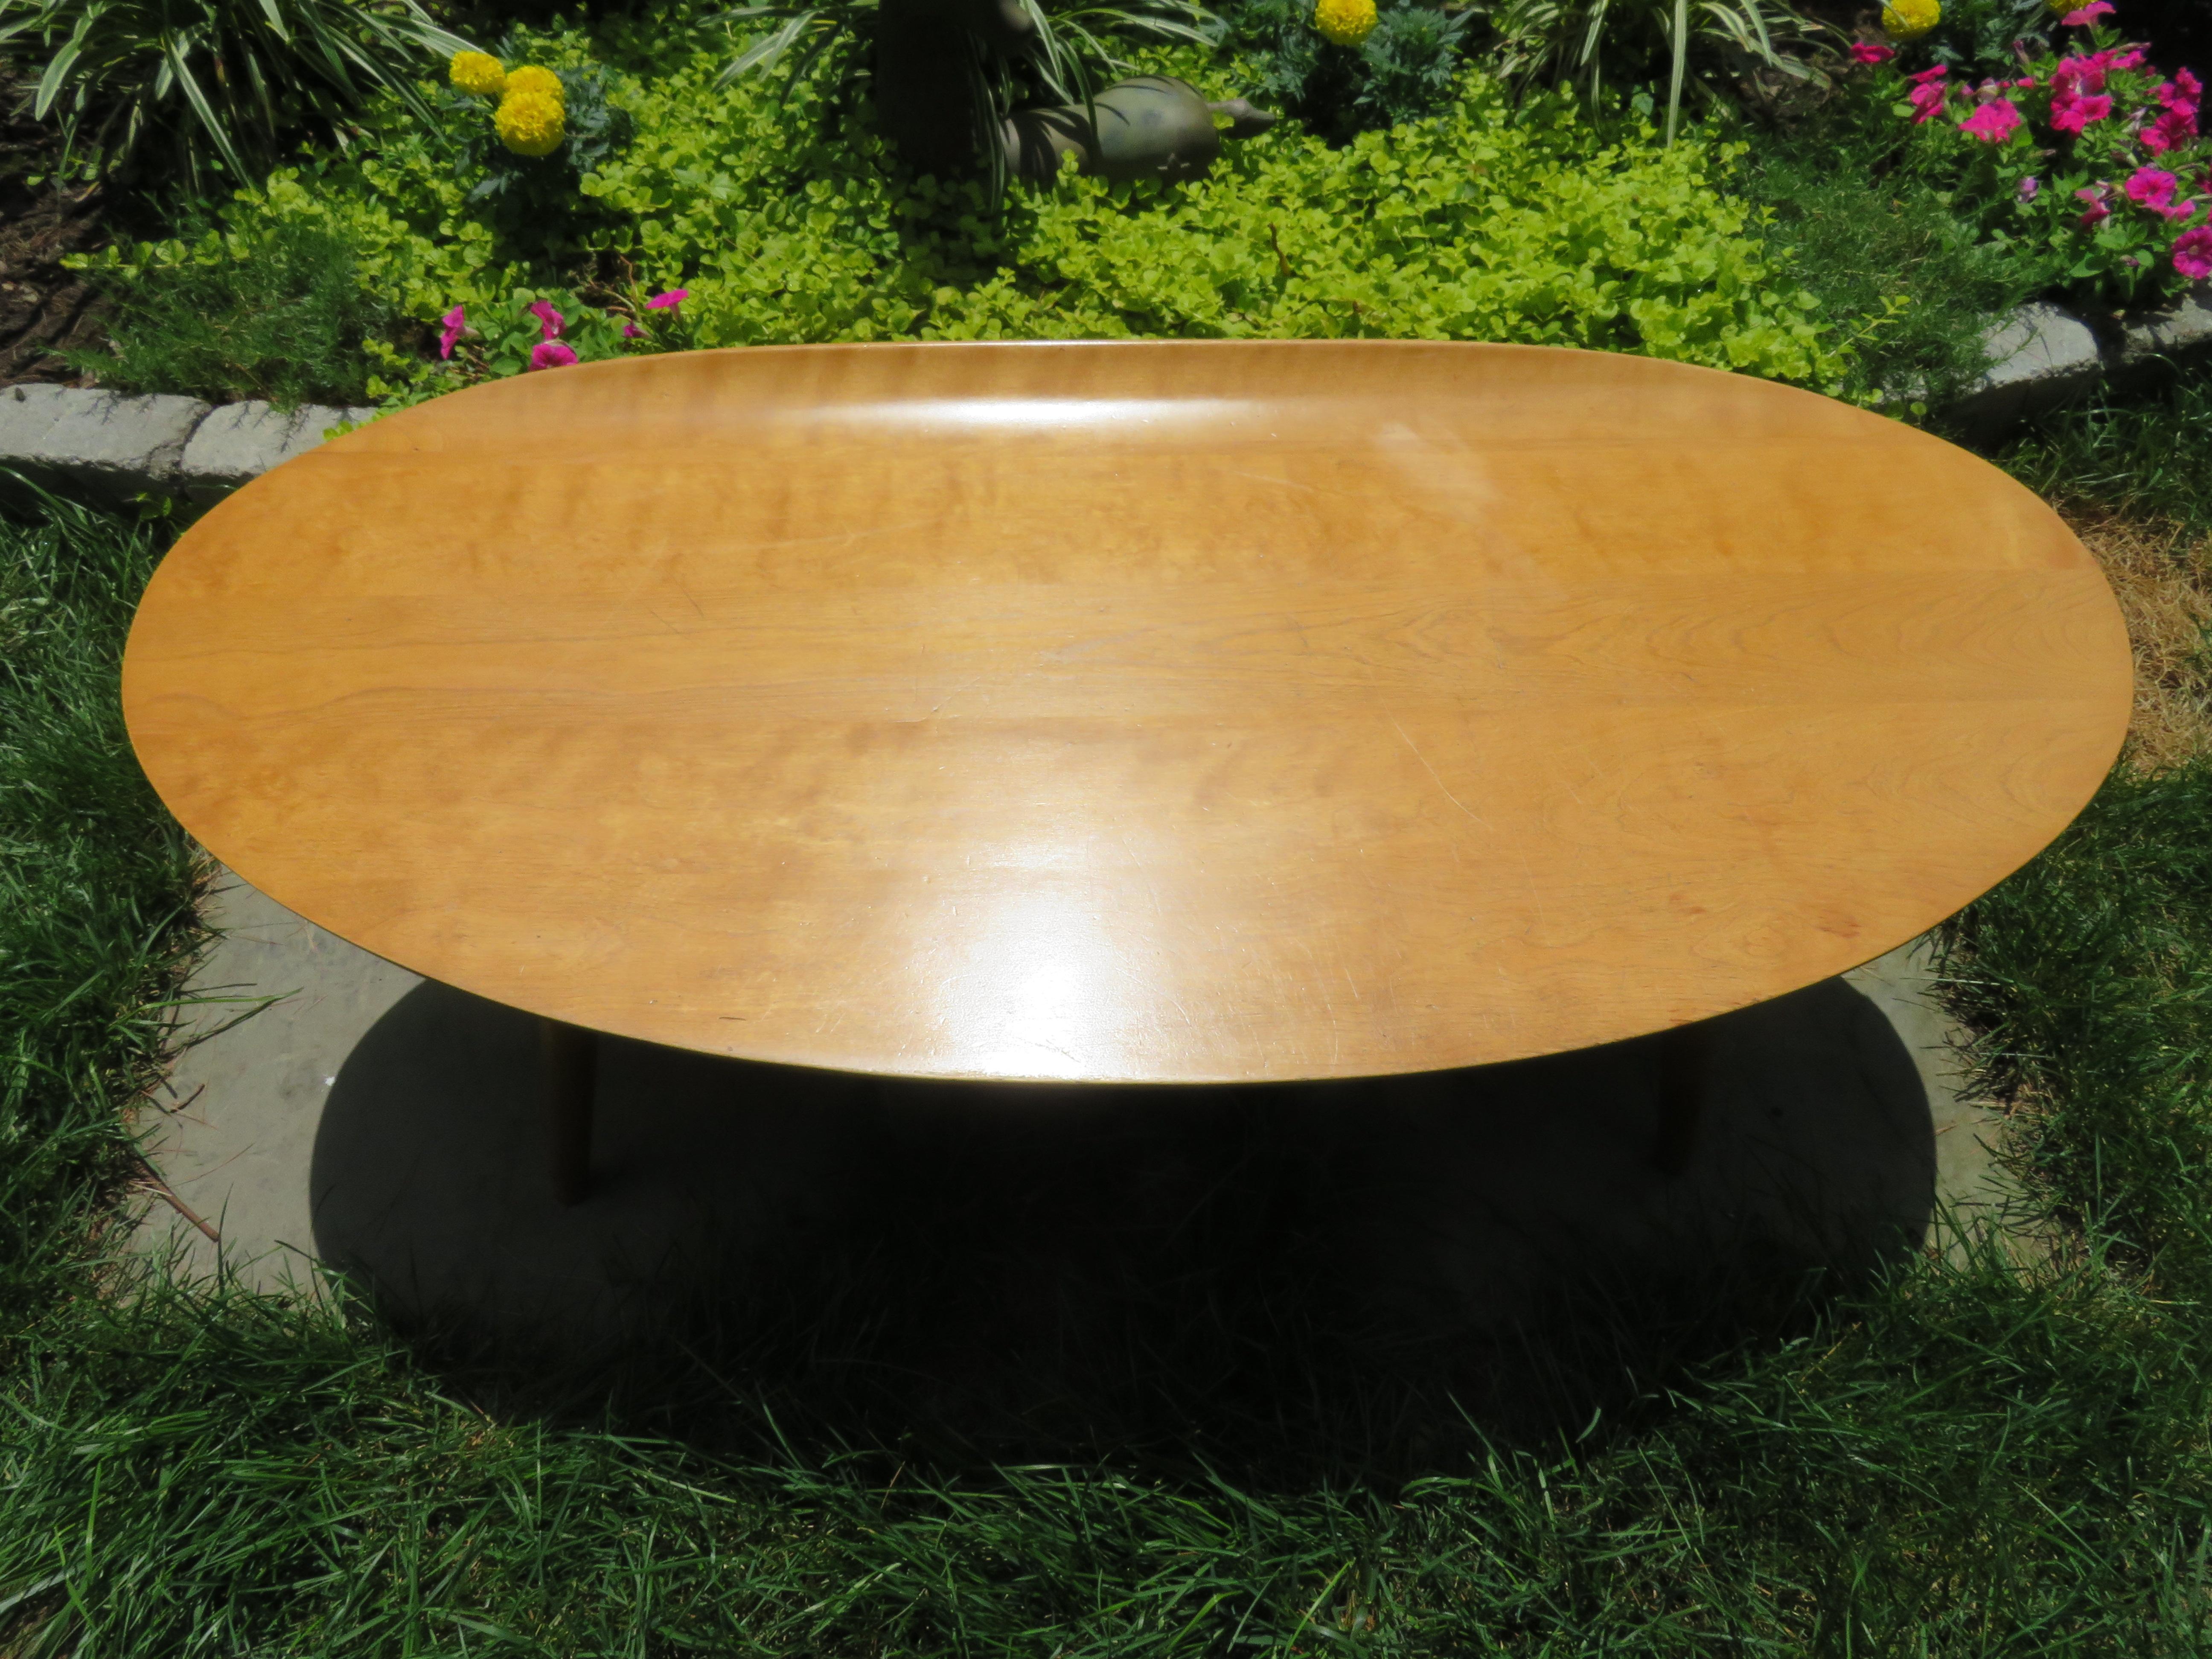 Lovely 1950s Russell Wright designed surfboard coffee or cocktail table with curved lip on one side. Beautiful warm toned maple surfboard shape sitting on 4 tapered turned legs. Russell Wright Conant ball markings are on underside of table. This